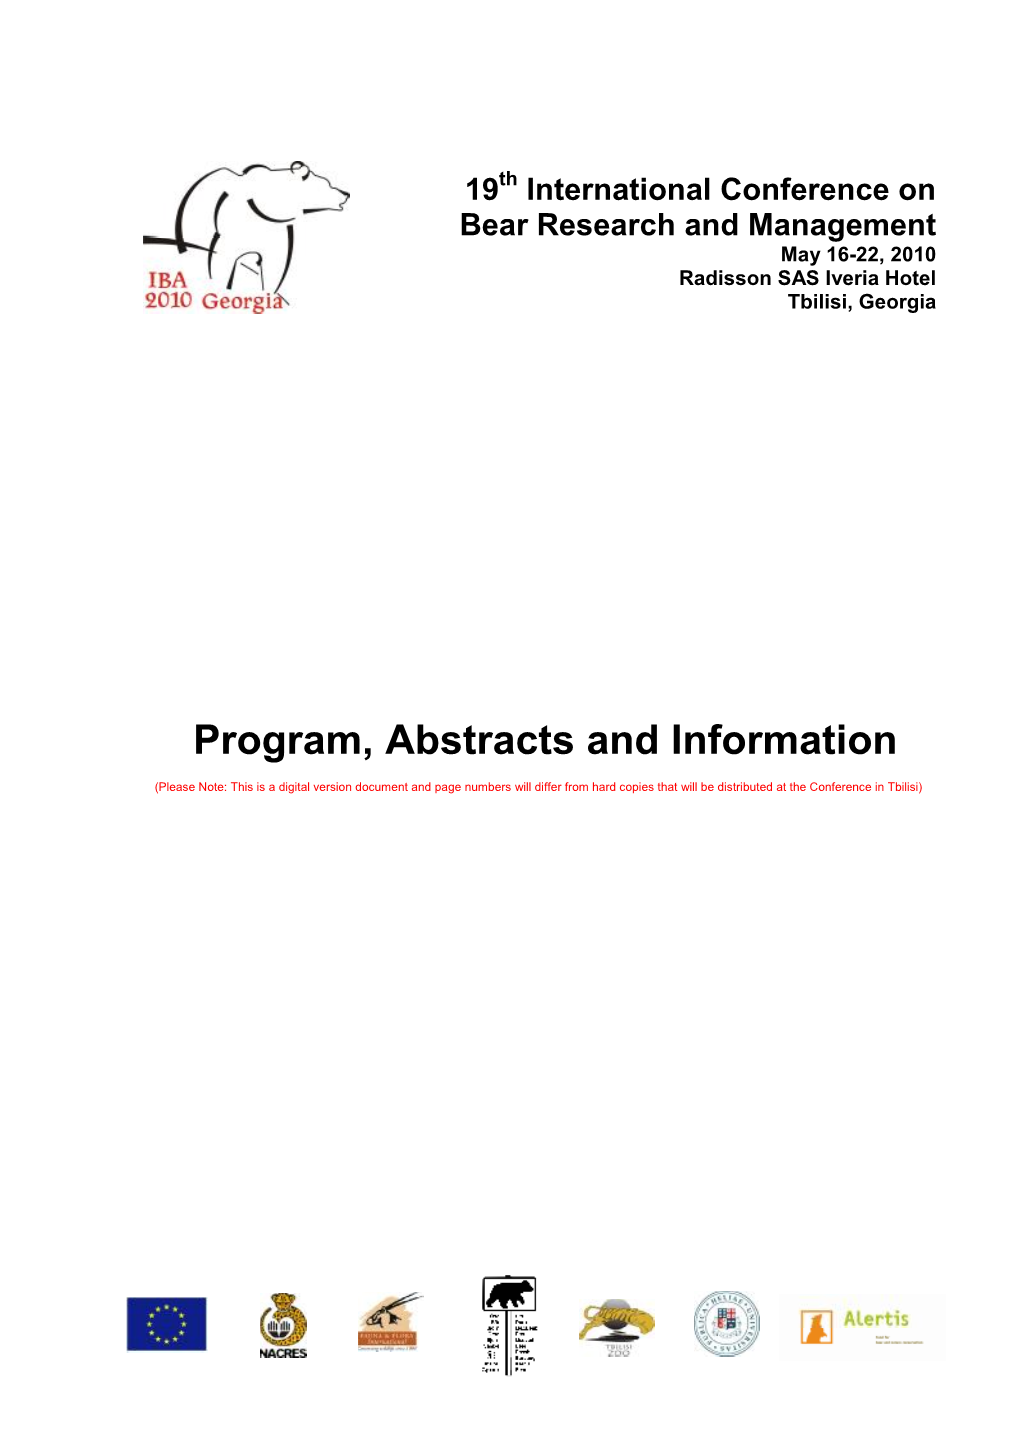 Program, Abstracts and Information